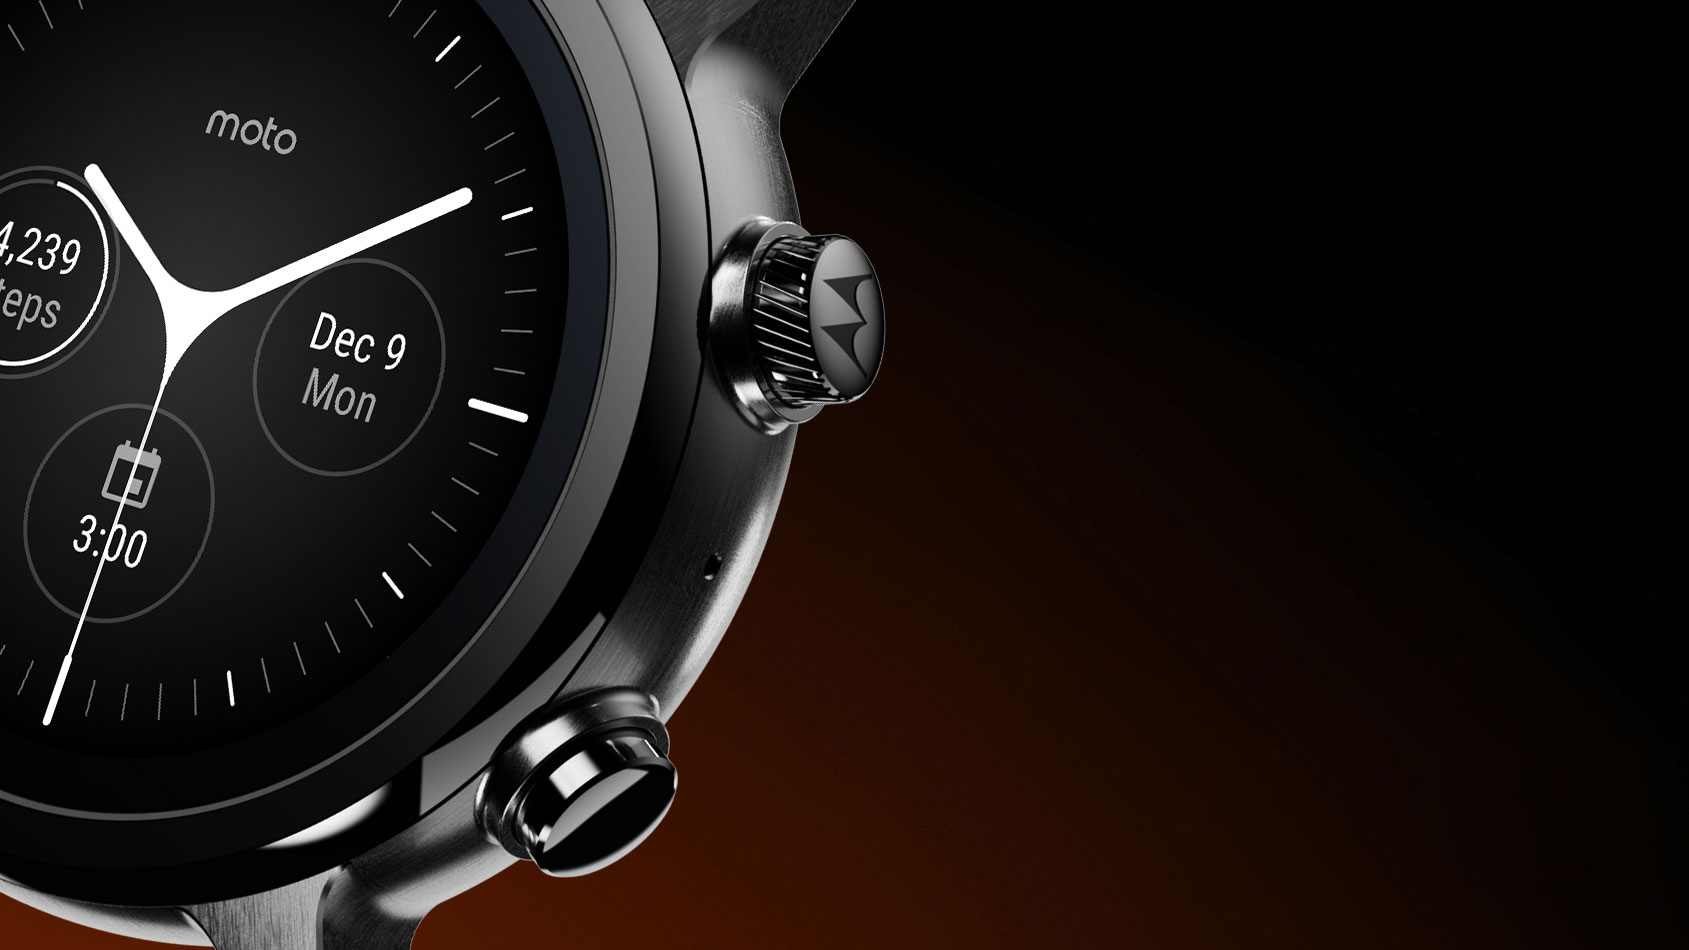 Images of future smartwatches and other gadgets from Motorola appeared on the network